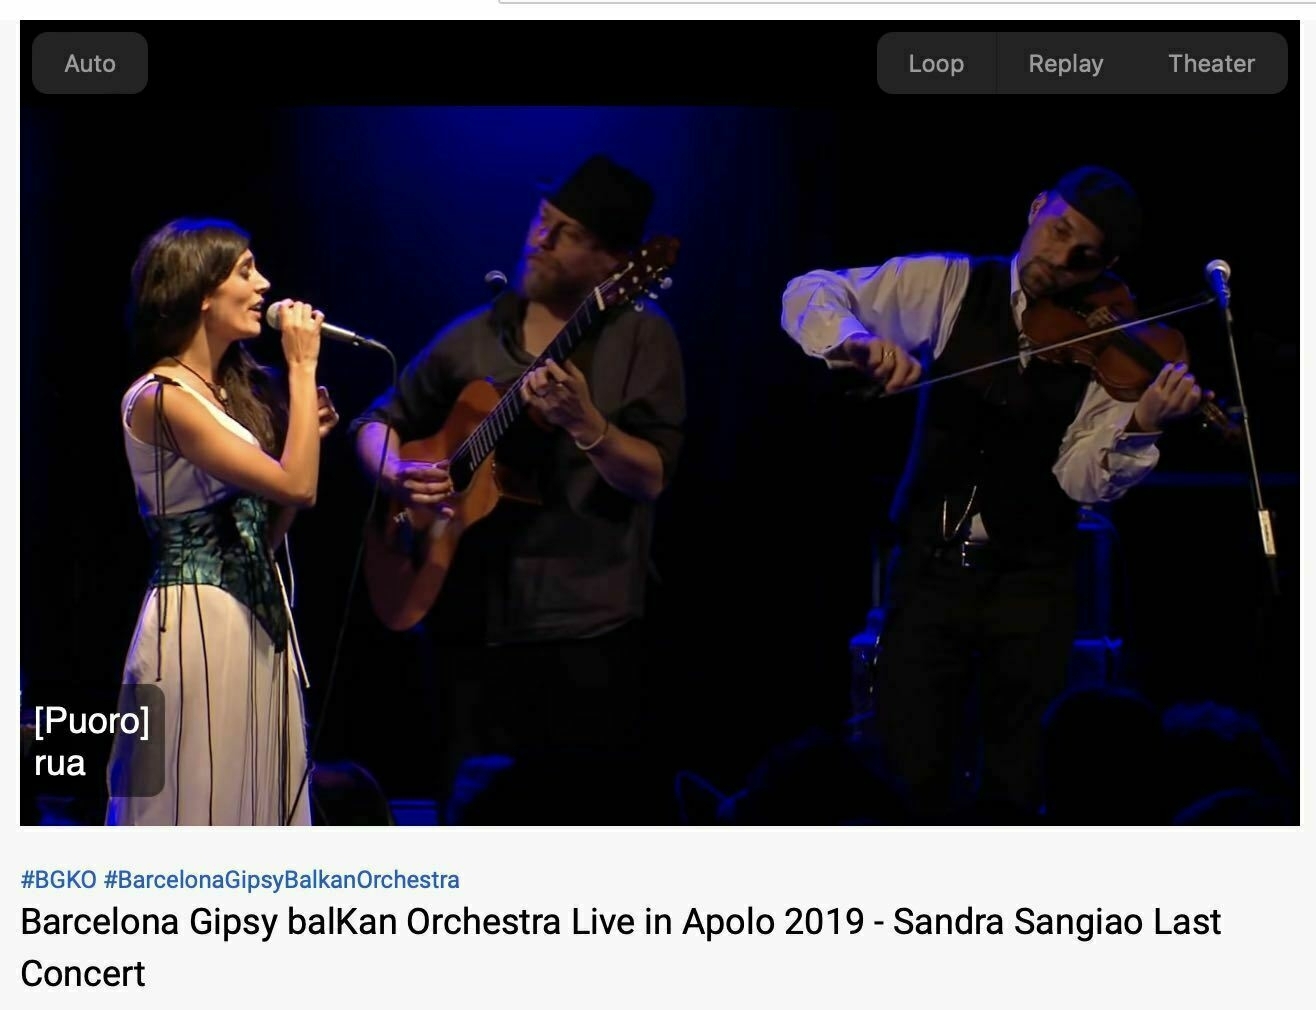 Screenshot showing Sandra Sangiao on stage singing with musicians playing. 